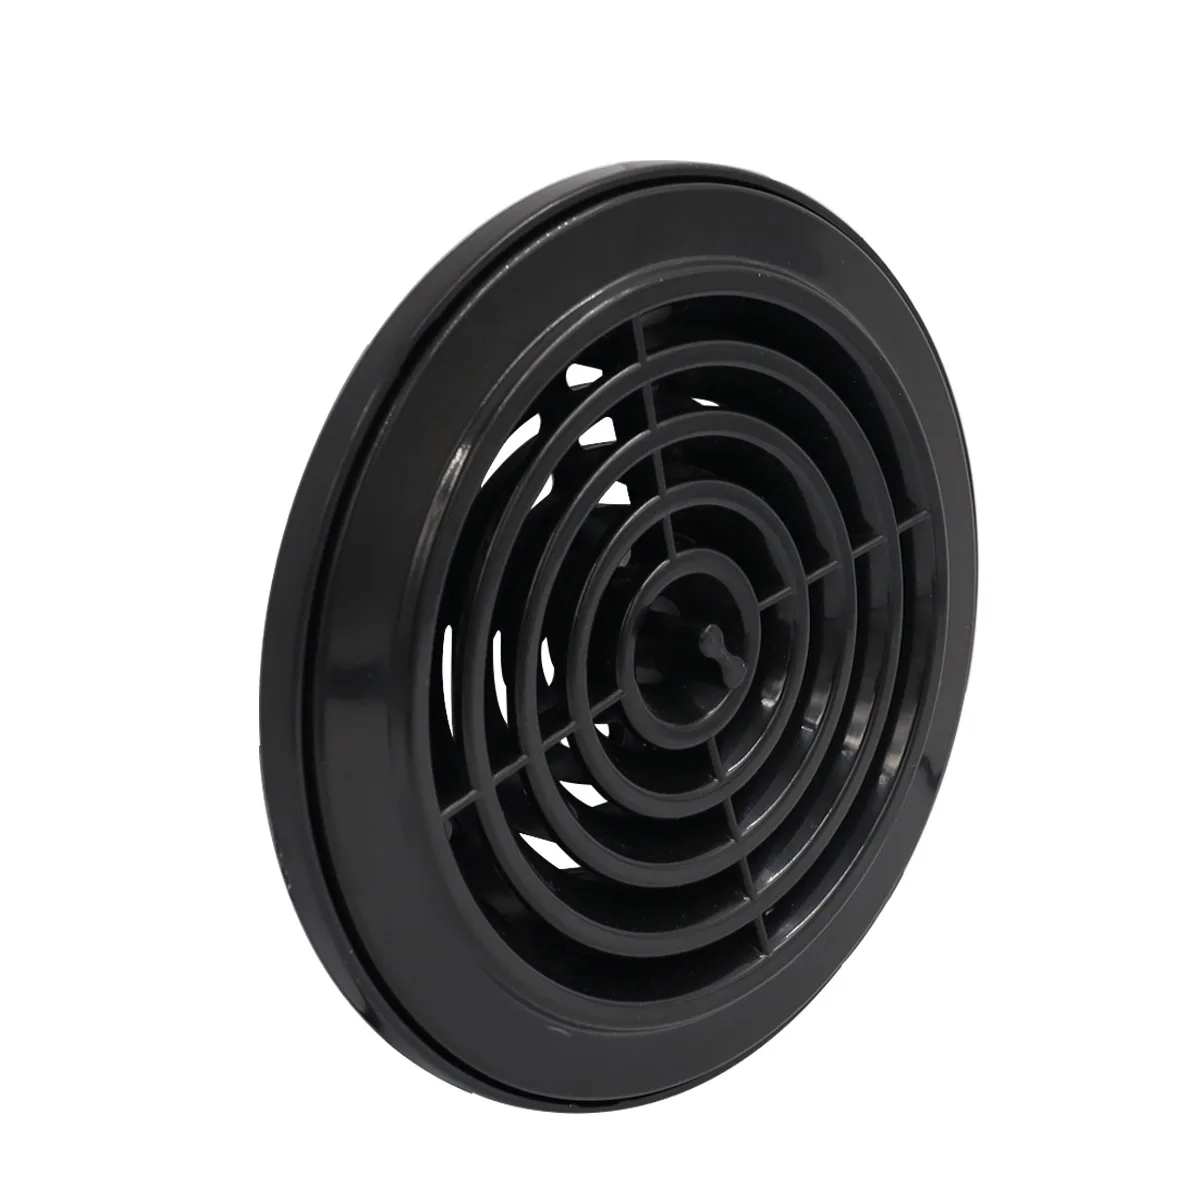 

Round Air Vent Louver Grille Cover ​Outlet Adjustable Exhaust Vent for RV Truck Bathroom Home Office